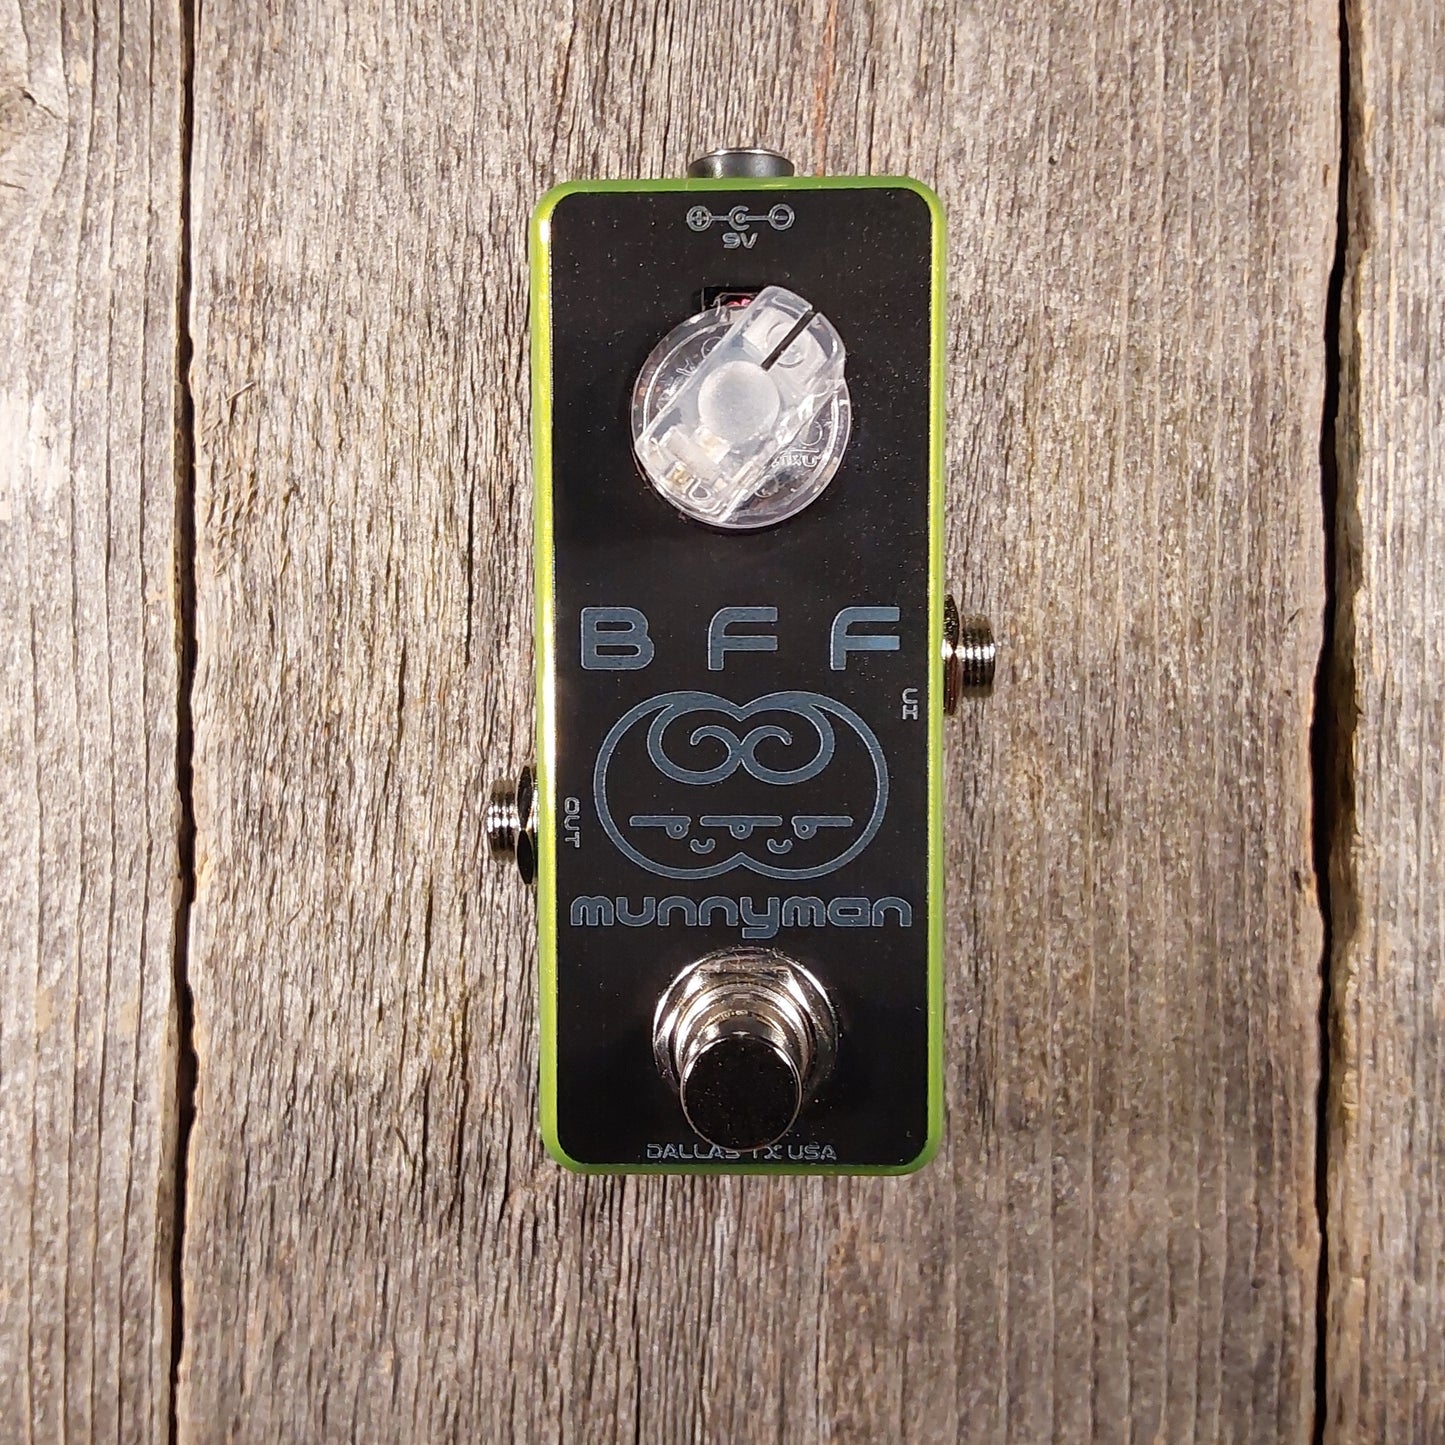 Munnyman BFF Overdrive Boost Pedal More Gain Music Exclusive Green